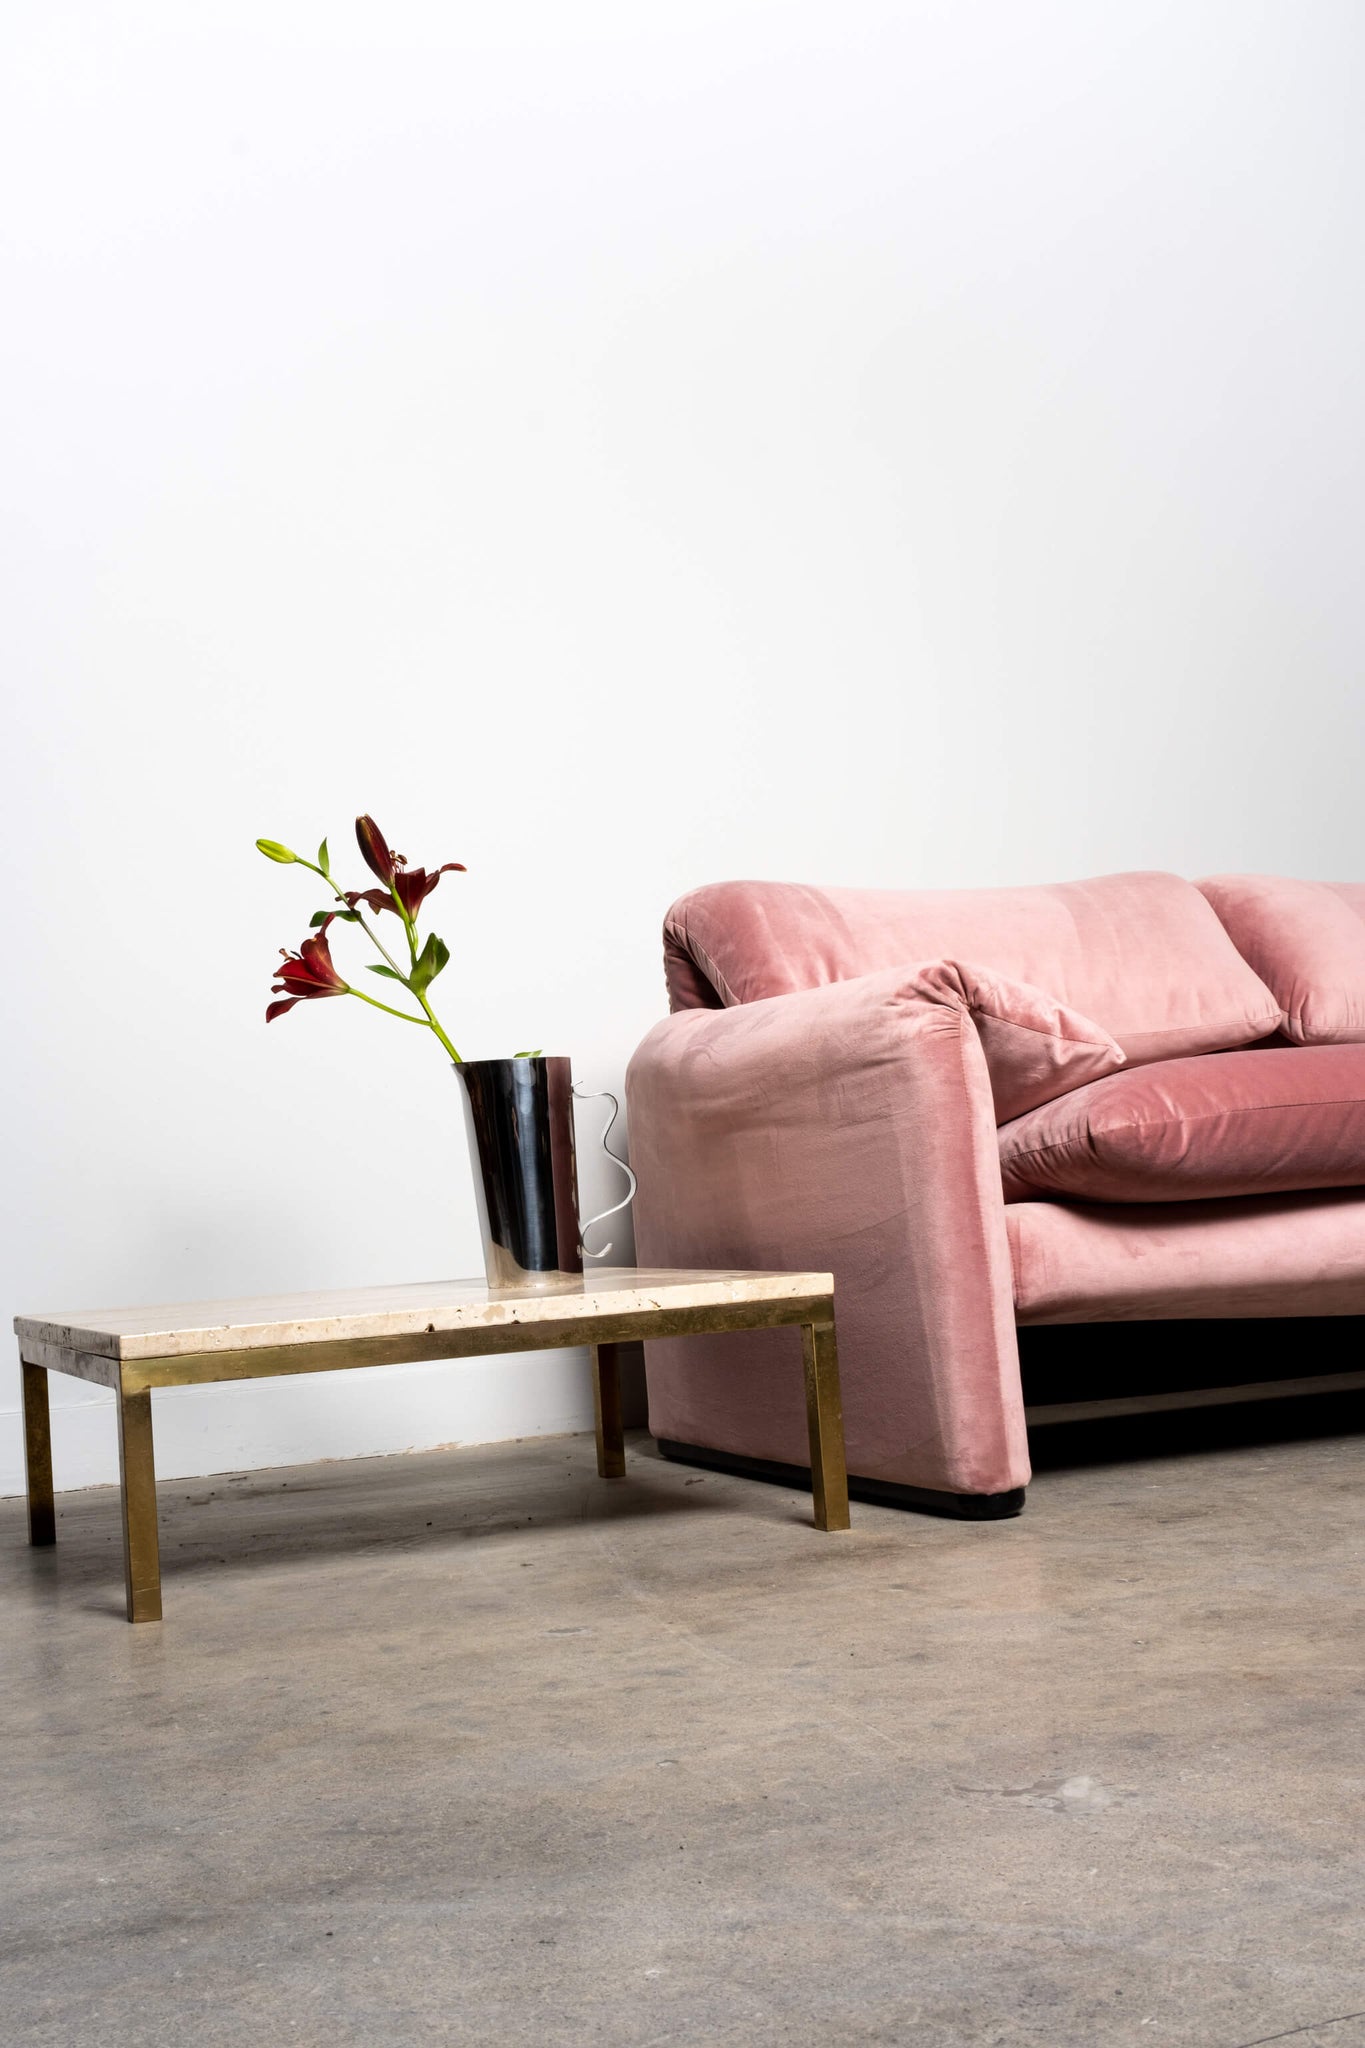 Vintage Low Profile Natural Travertine Coffee Table with Brass Base, shown with pink fabric sofa and vase with flowers